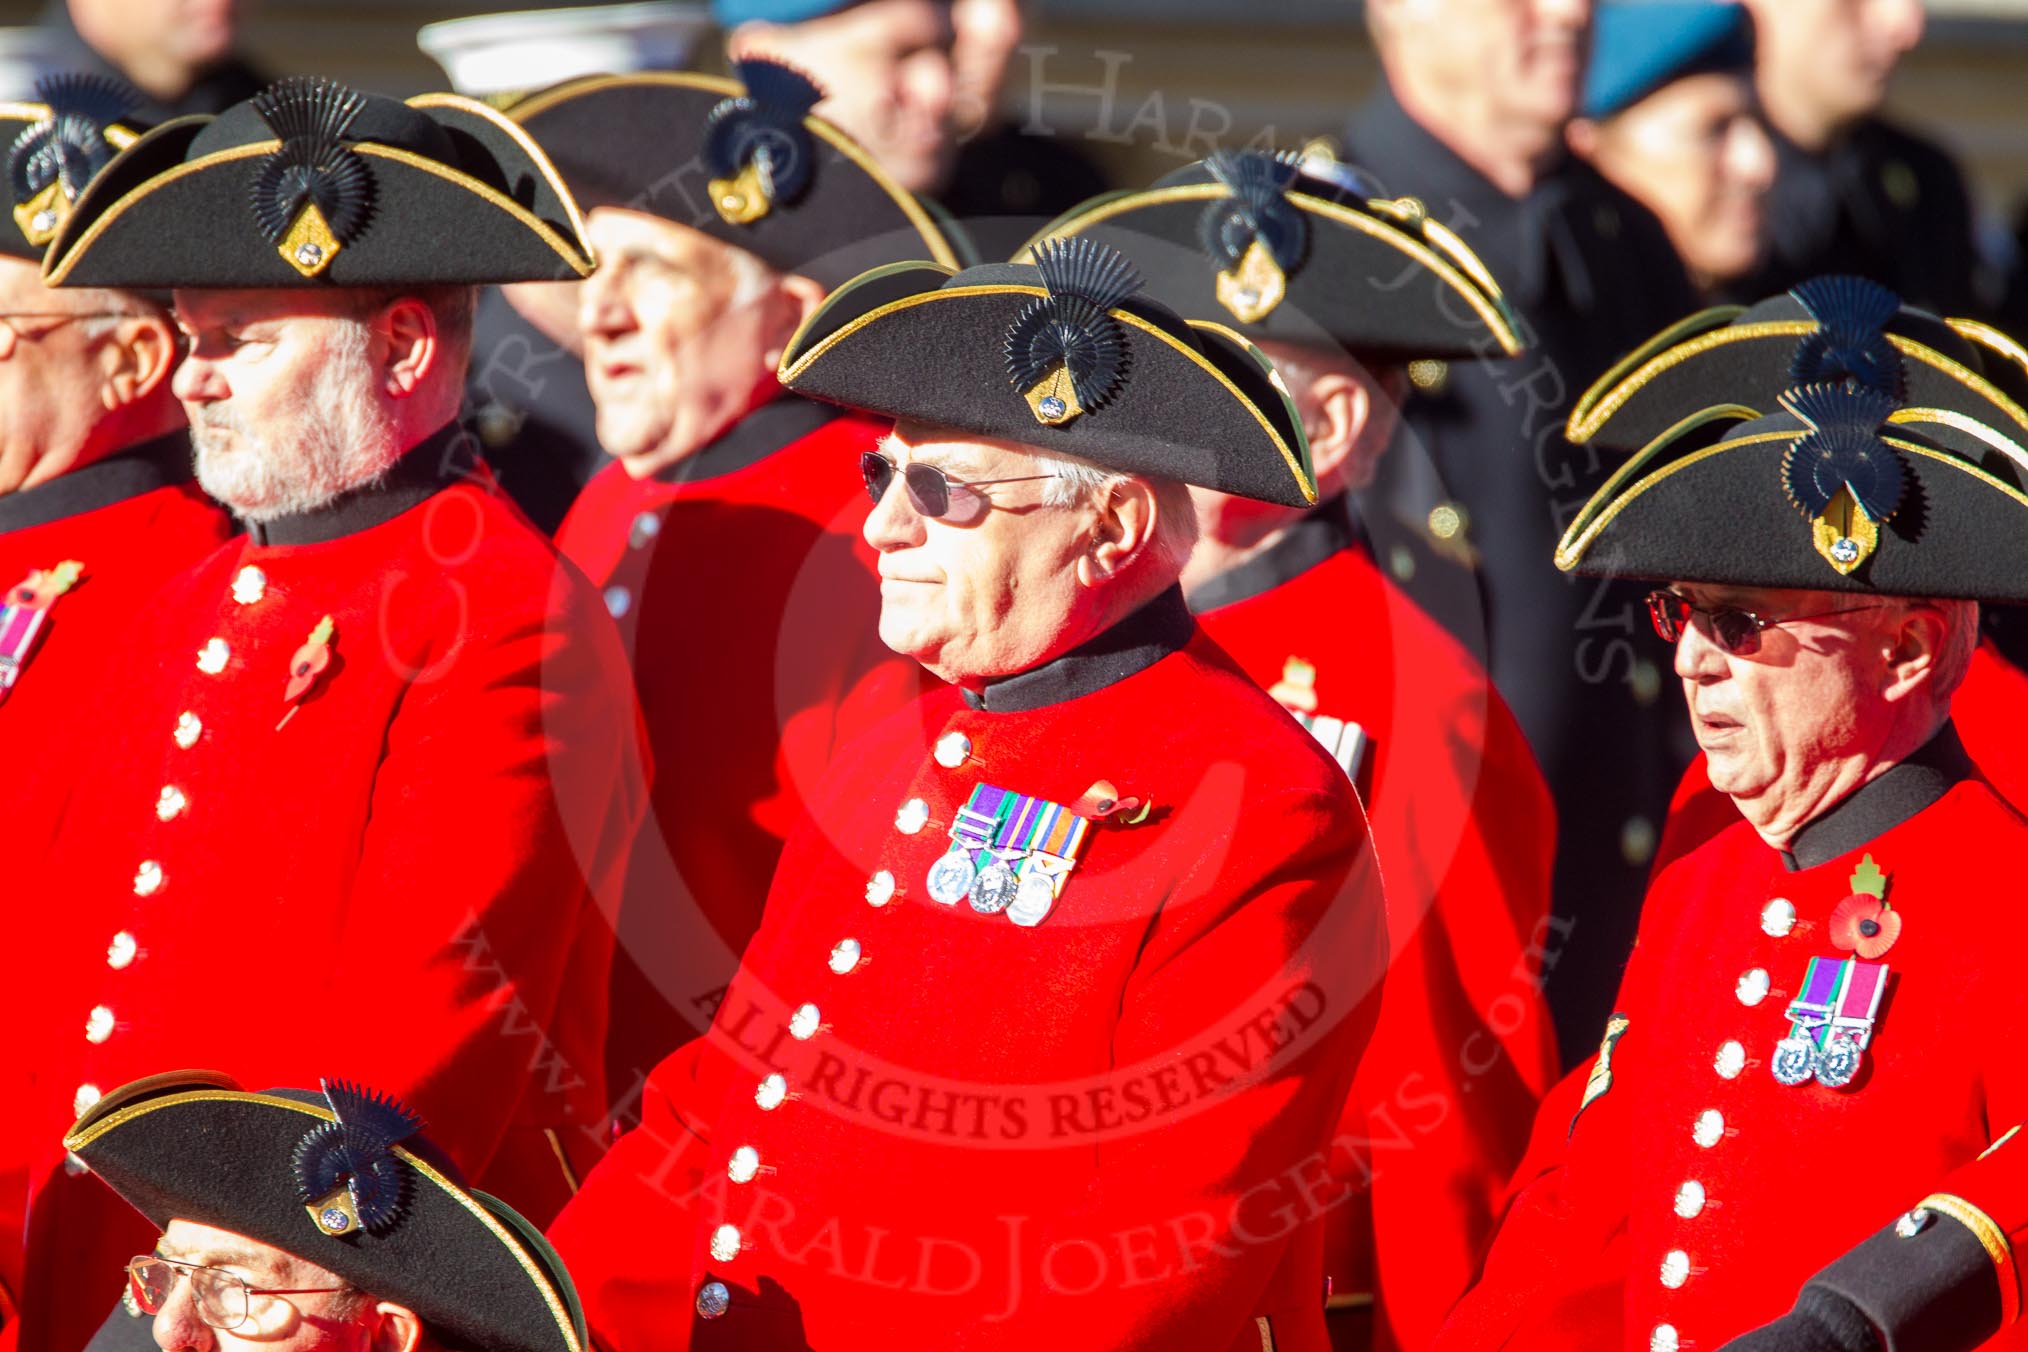 Remembrance Sunday Cenotaph March Past 2013: D30 - Royal Hospital Chelsea, the Chelsea Pensioners..
Press stand opposite the Foreign Office building, Whitehall, London SW1,
London,
Greater London,
United Kingdom,
on 10 November 2013 at 11:43, image #269